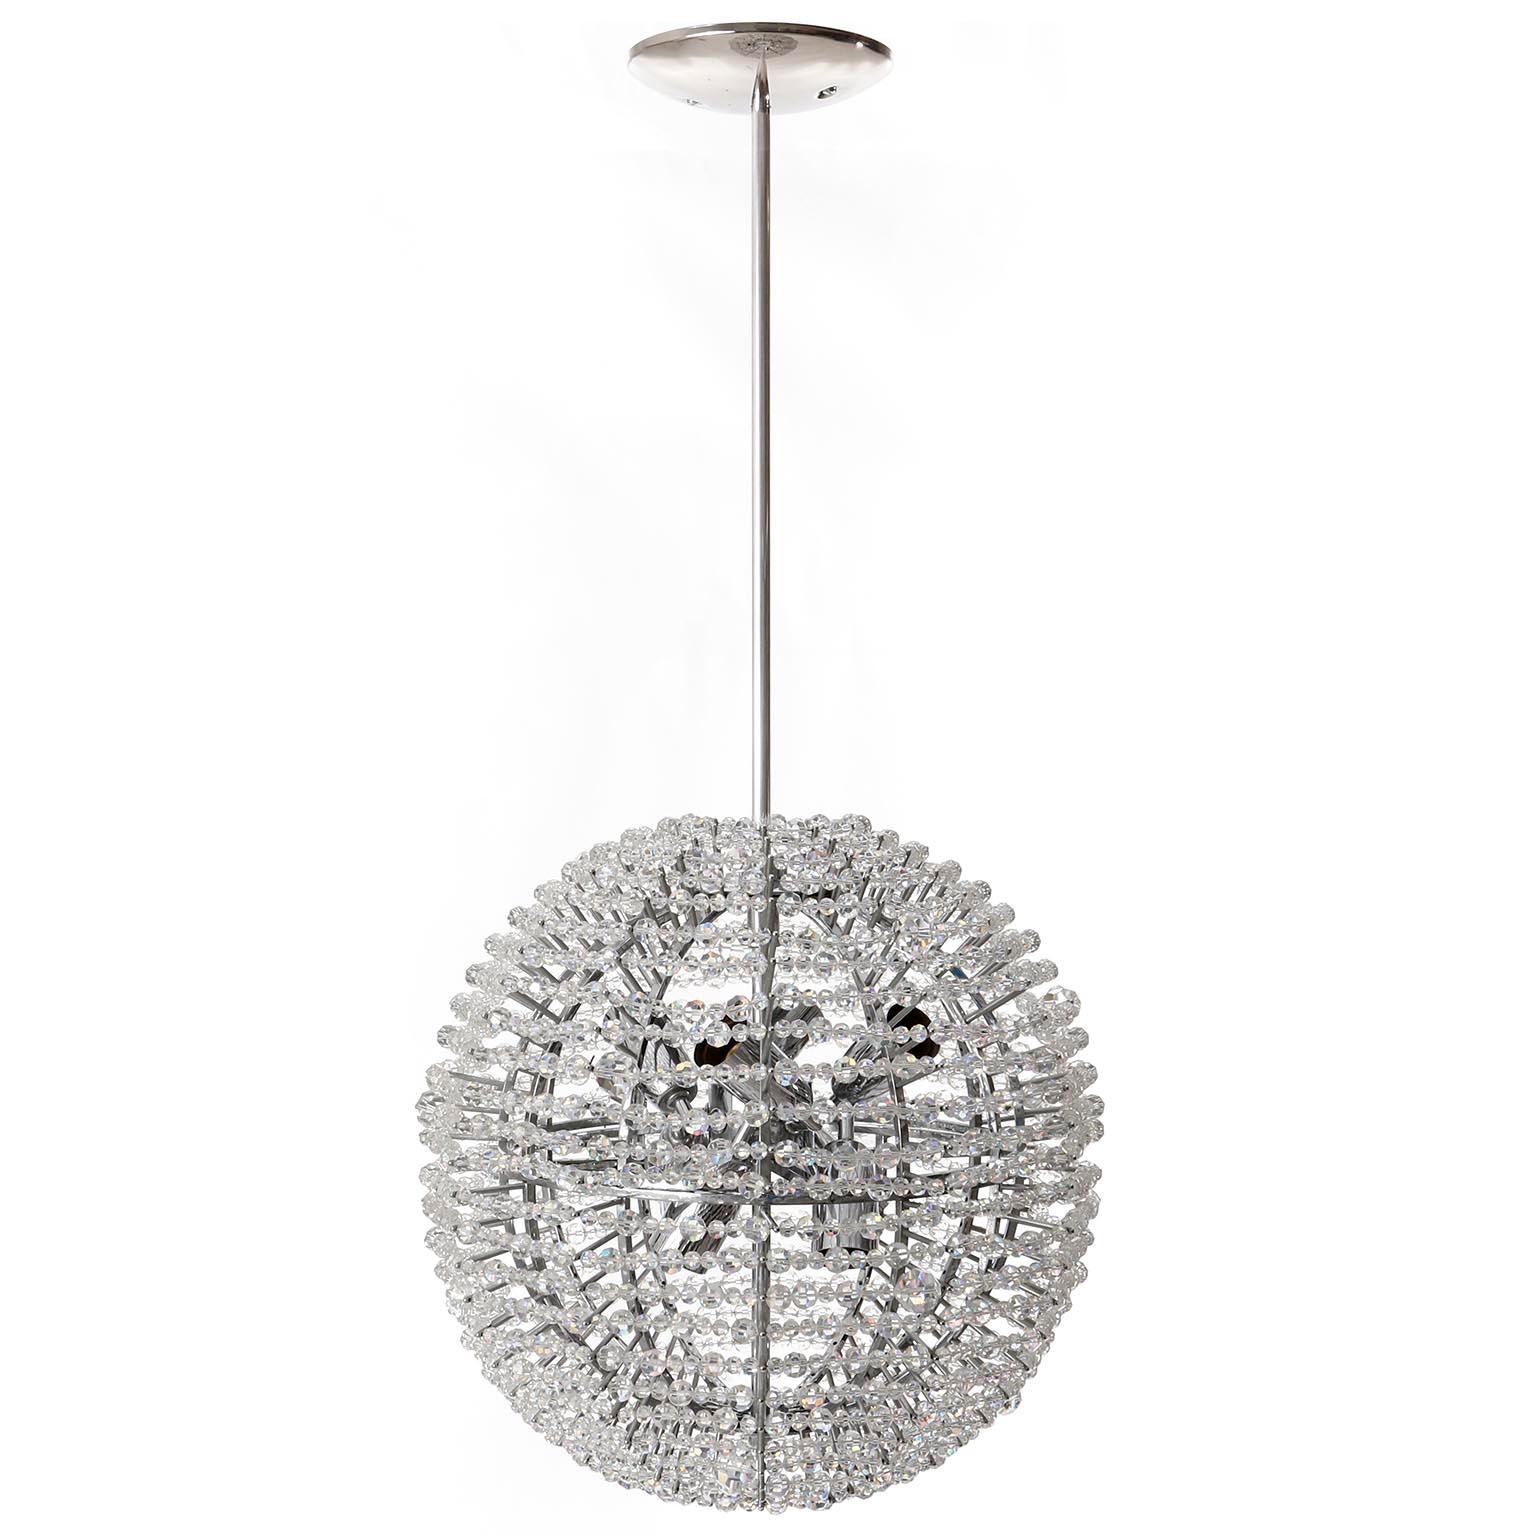 Mid-Century Modern One of Two Bakalowits Chandeliers 'Supernova', Nickel Crystal Glass, 1960s For Sale